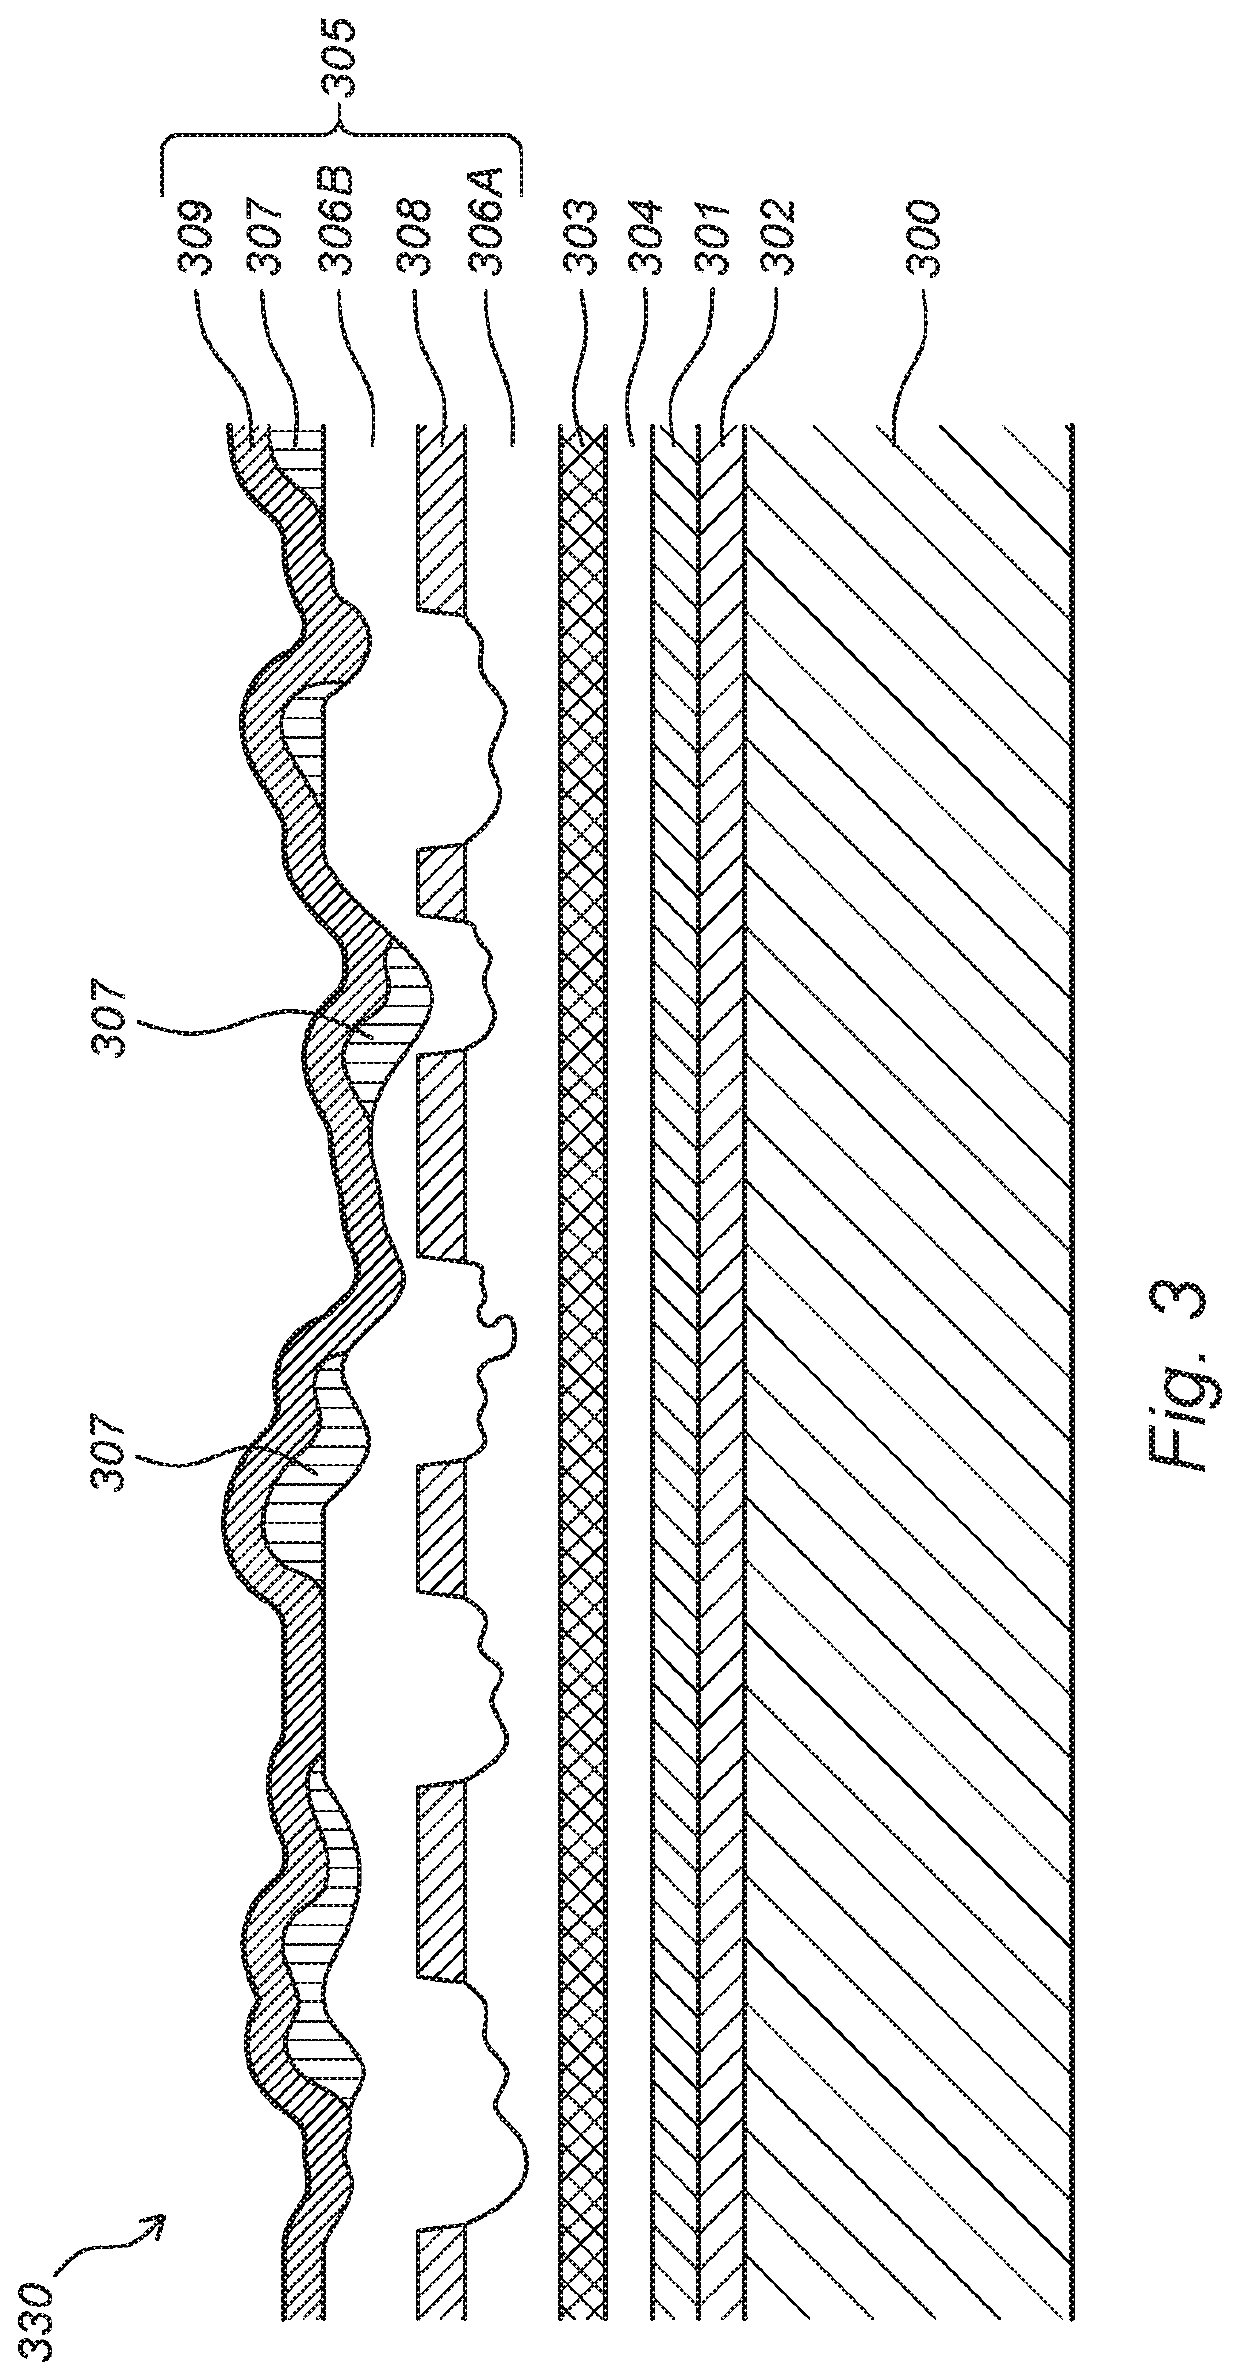 Decorative Panel, Panel Covering, and Method of Producing Such a Decorative Panel